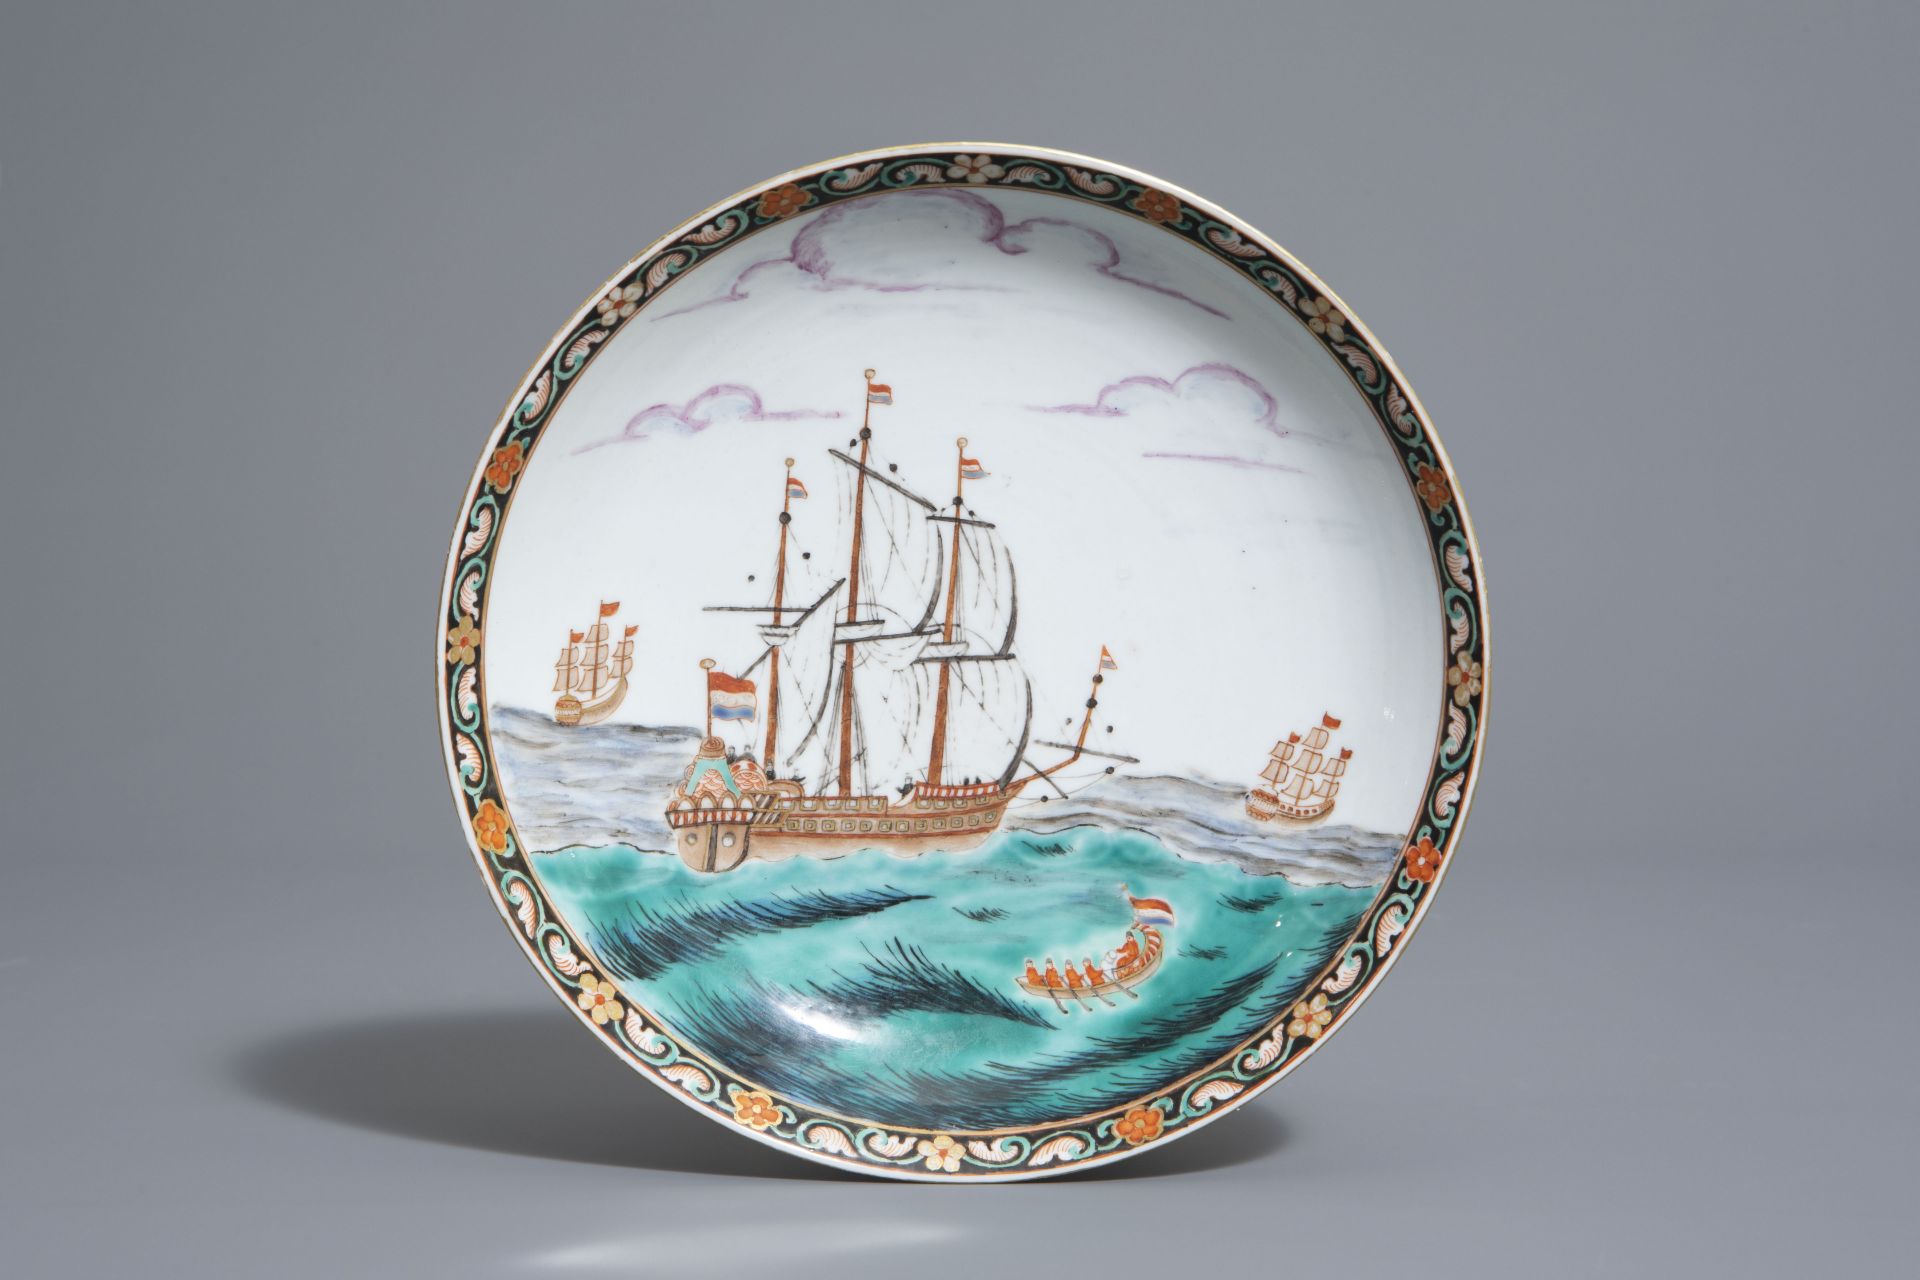 A Dutch decorated Chinese plate with a ship at sea, 18th/19th C.